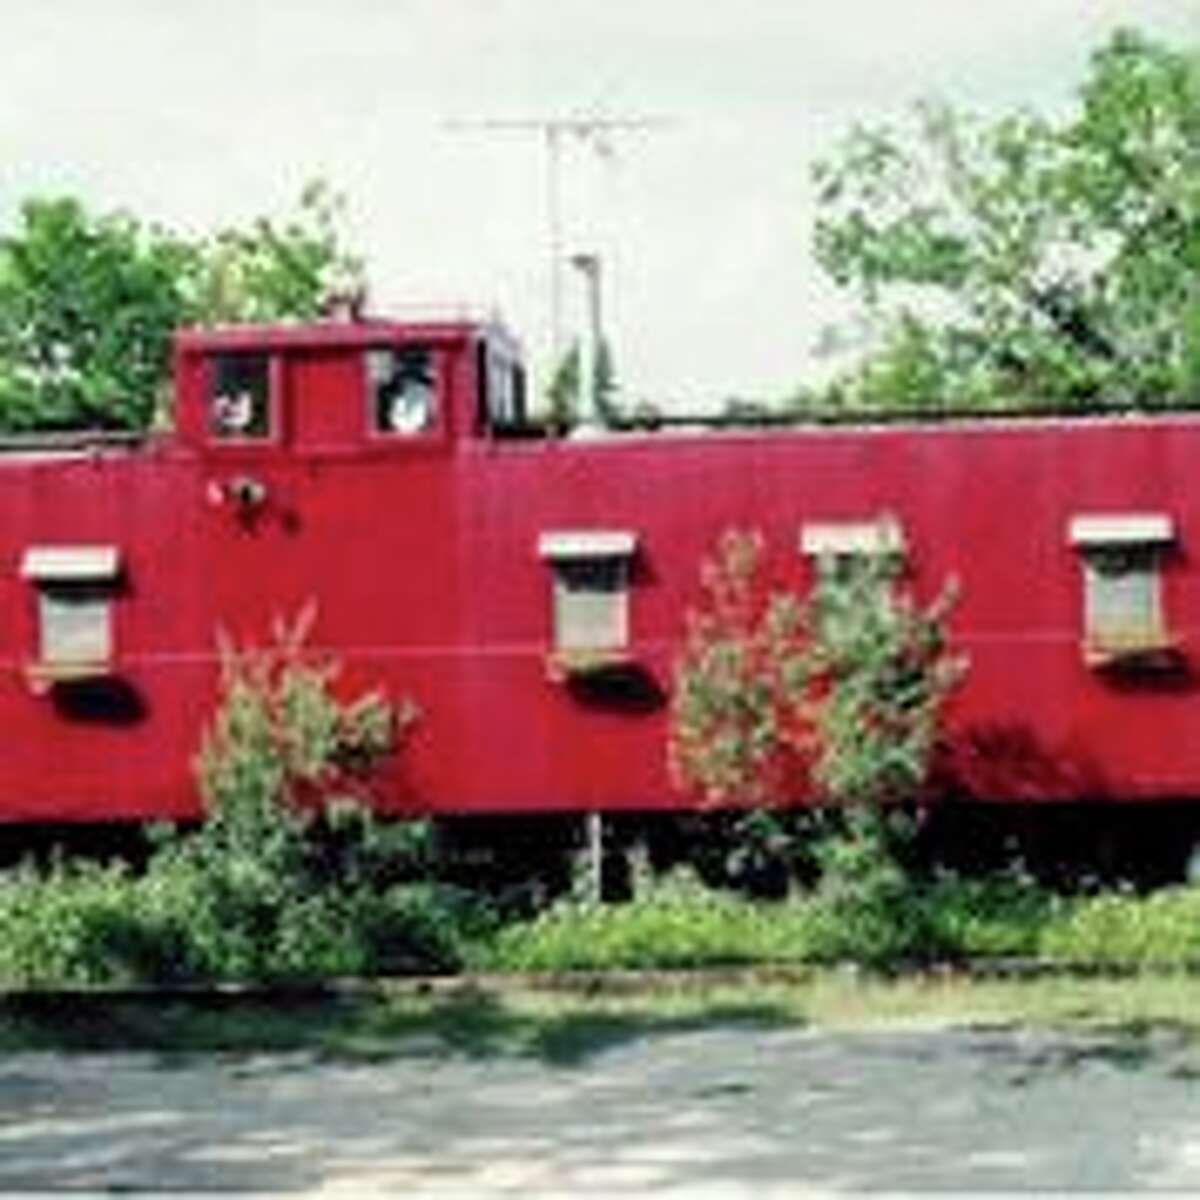 Unique Caboose: Bandera Love trains? Now you can stay in one! This renovated caboose has an antique wood-burning Franklin stove and a large deck that overlooks a private lake, stocked with catfish and bass. 1 bed/1 bath $151 per night GlampingHub.com